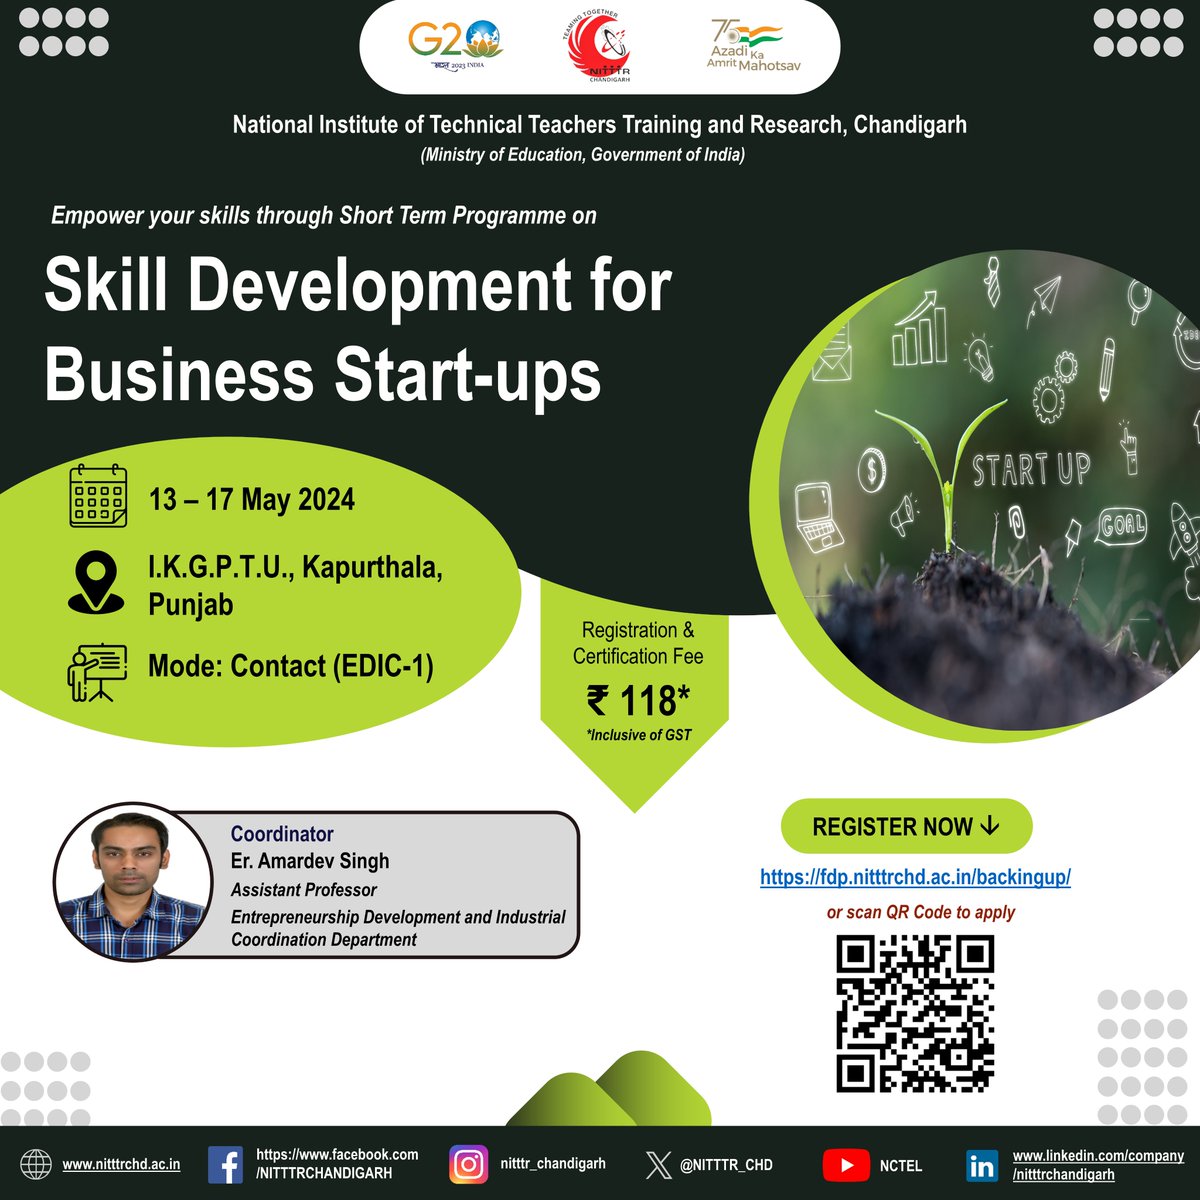 Join us for a 1 Week course on Skill Development for Business Start-ups to be organized by the EDIC Dept. from 13-17 May'24. Interested faculty & staff members may apply at fdp.nitttrchd.ac.in/backingup/ #nitttrchd #SkillBuilding #StartupLife #BusinessStartup #EntrepreneurSkills